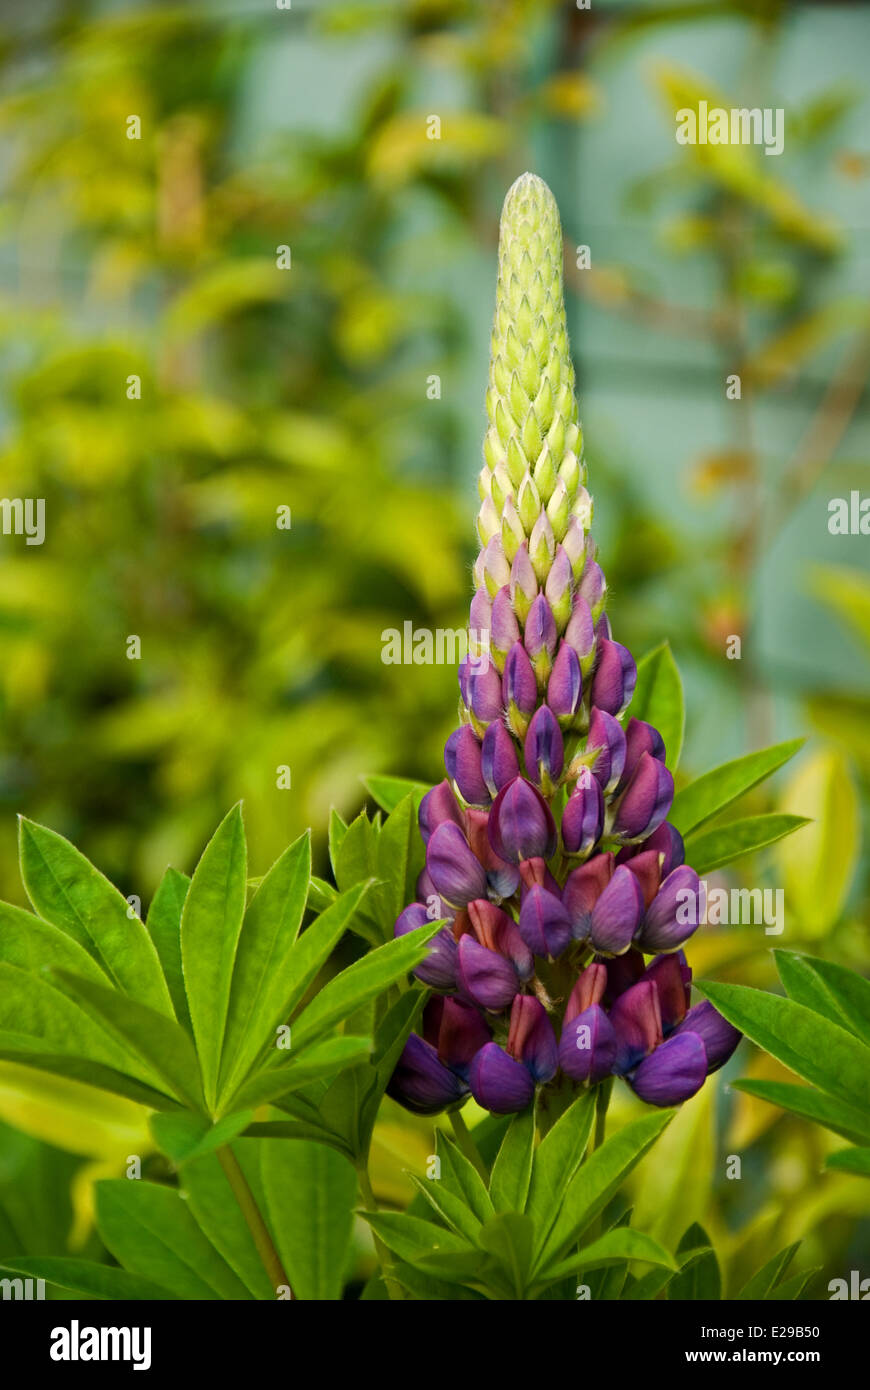 A lupin flower head starting to bloom Stock Photo